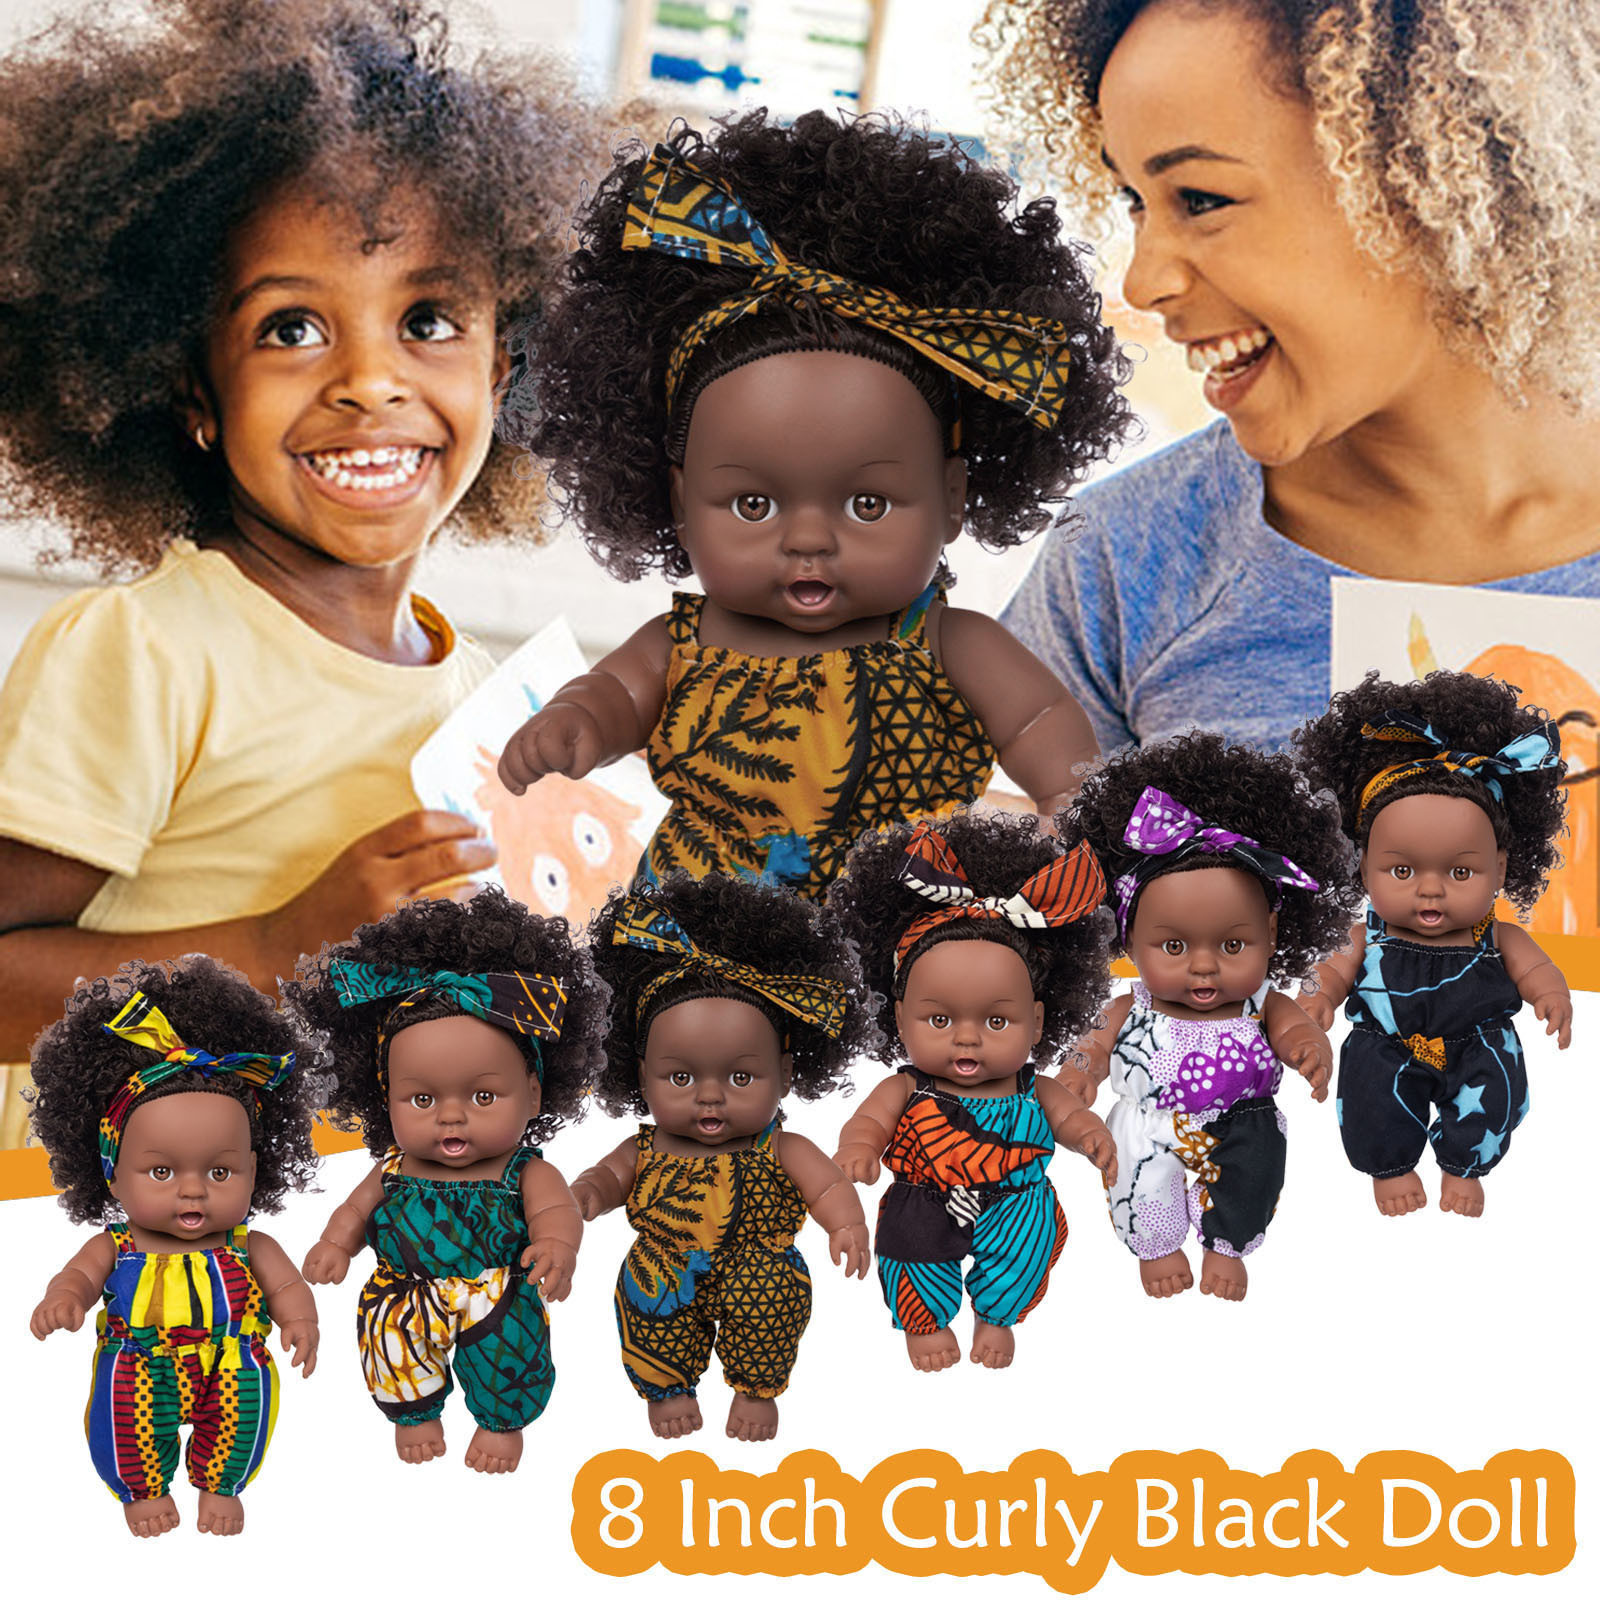 African Black Baby Toy Realistic Brown Eyes And So..